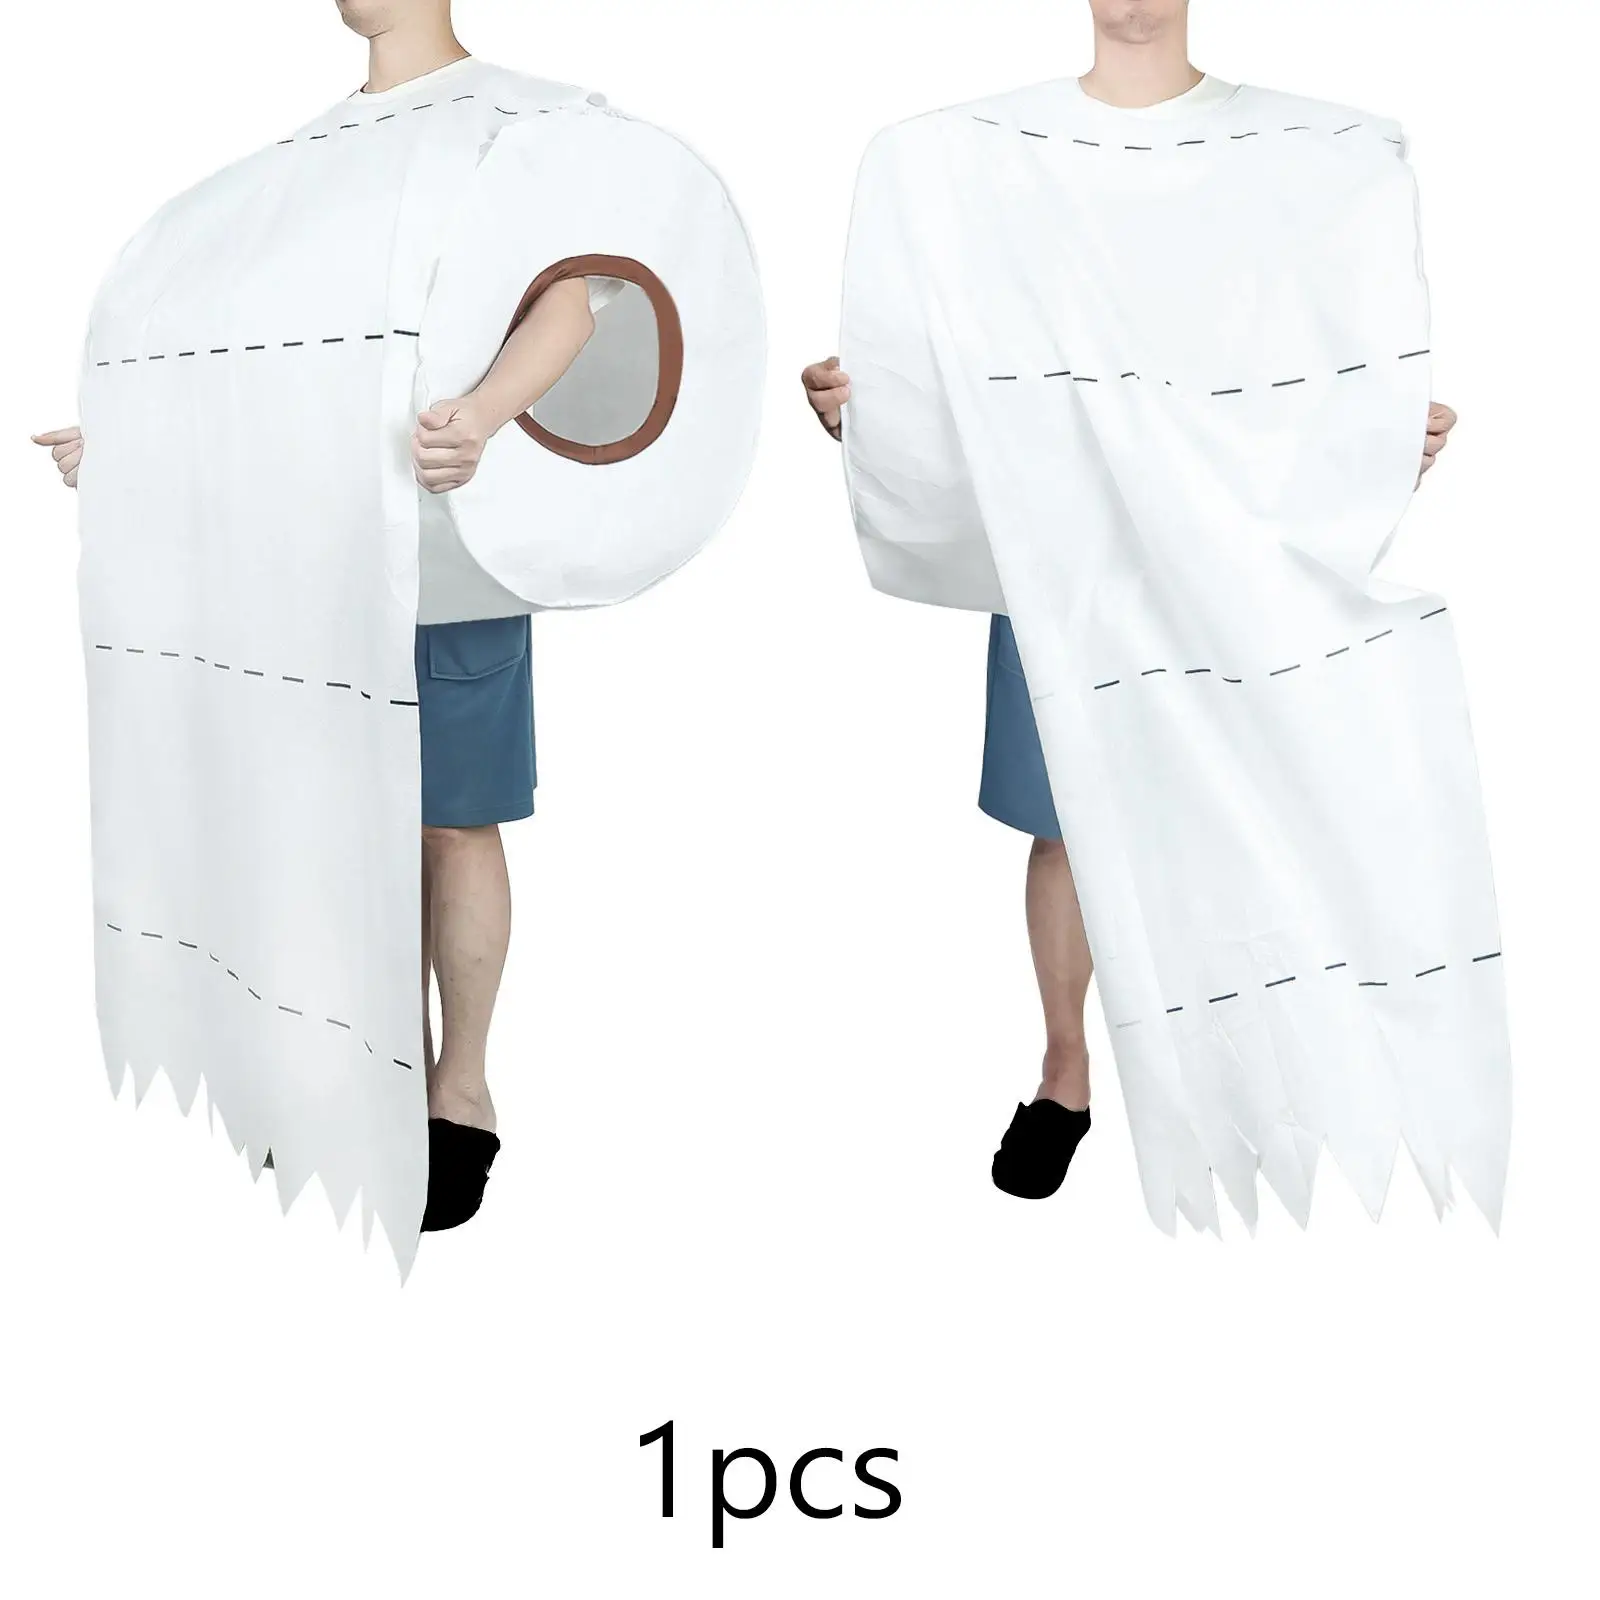 Toilet Tissue Costume Large Roll Cosplay Costume Funny Roll Paper Cosplay Clothing for Stage Halloween Cosplay Adults Couples